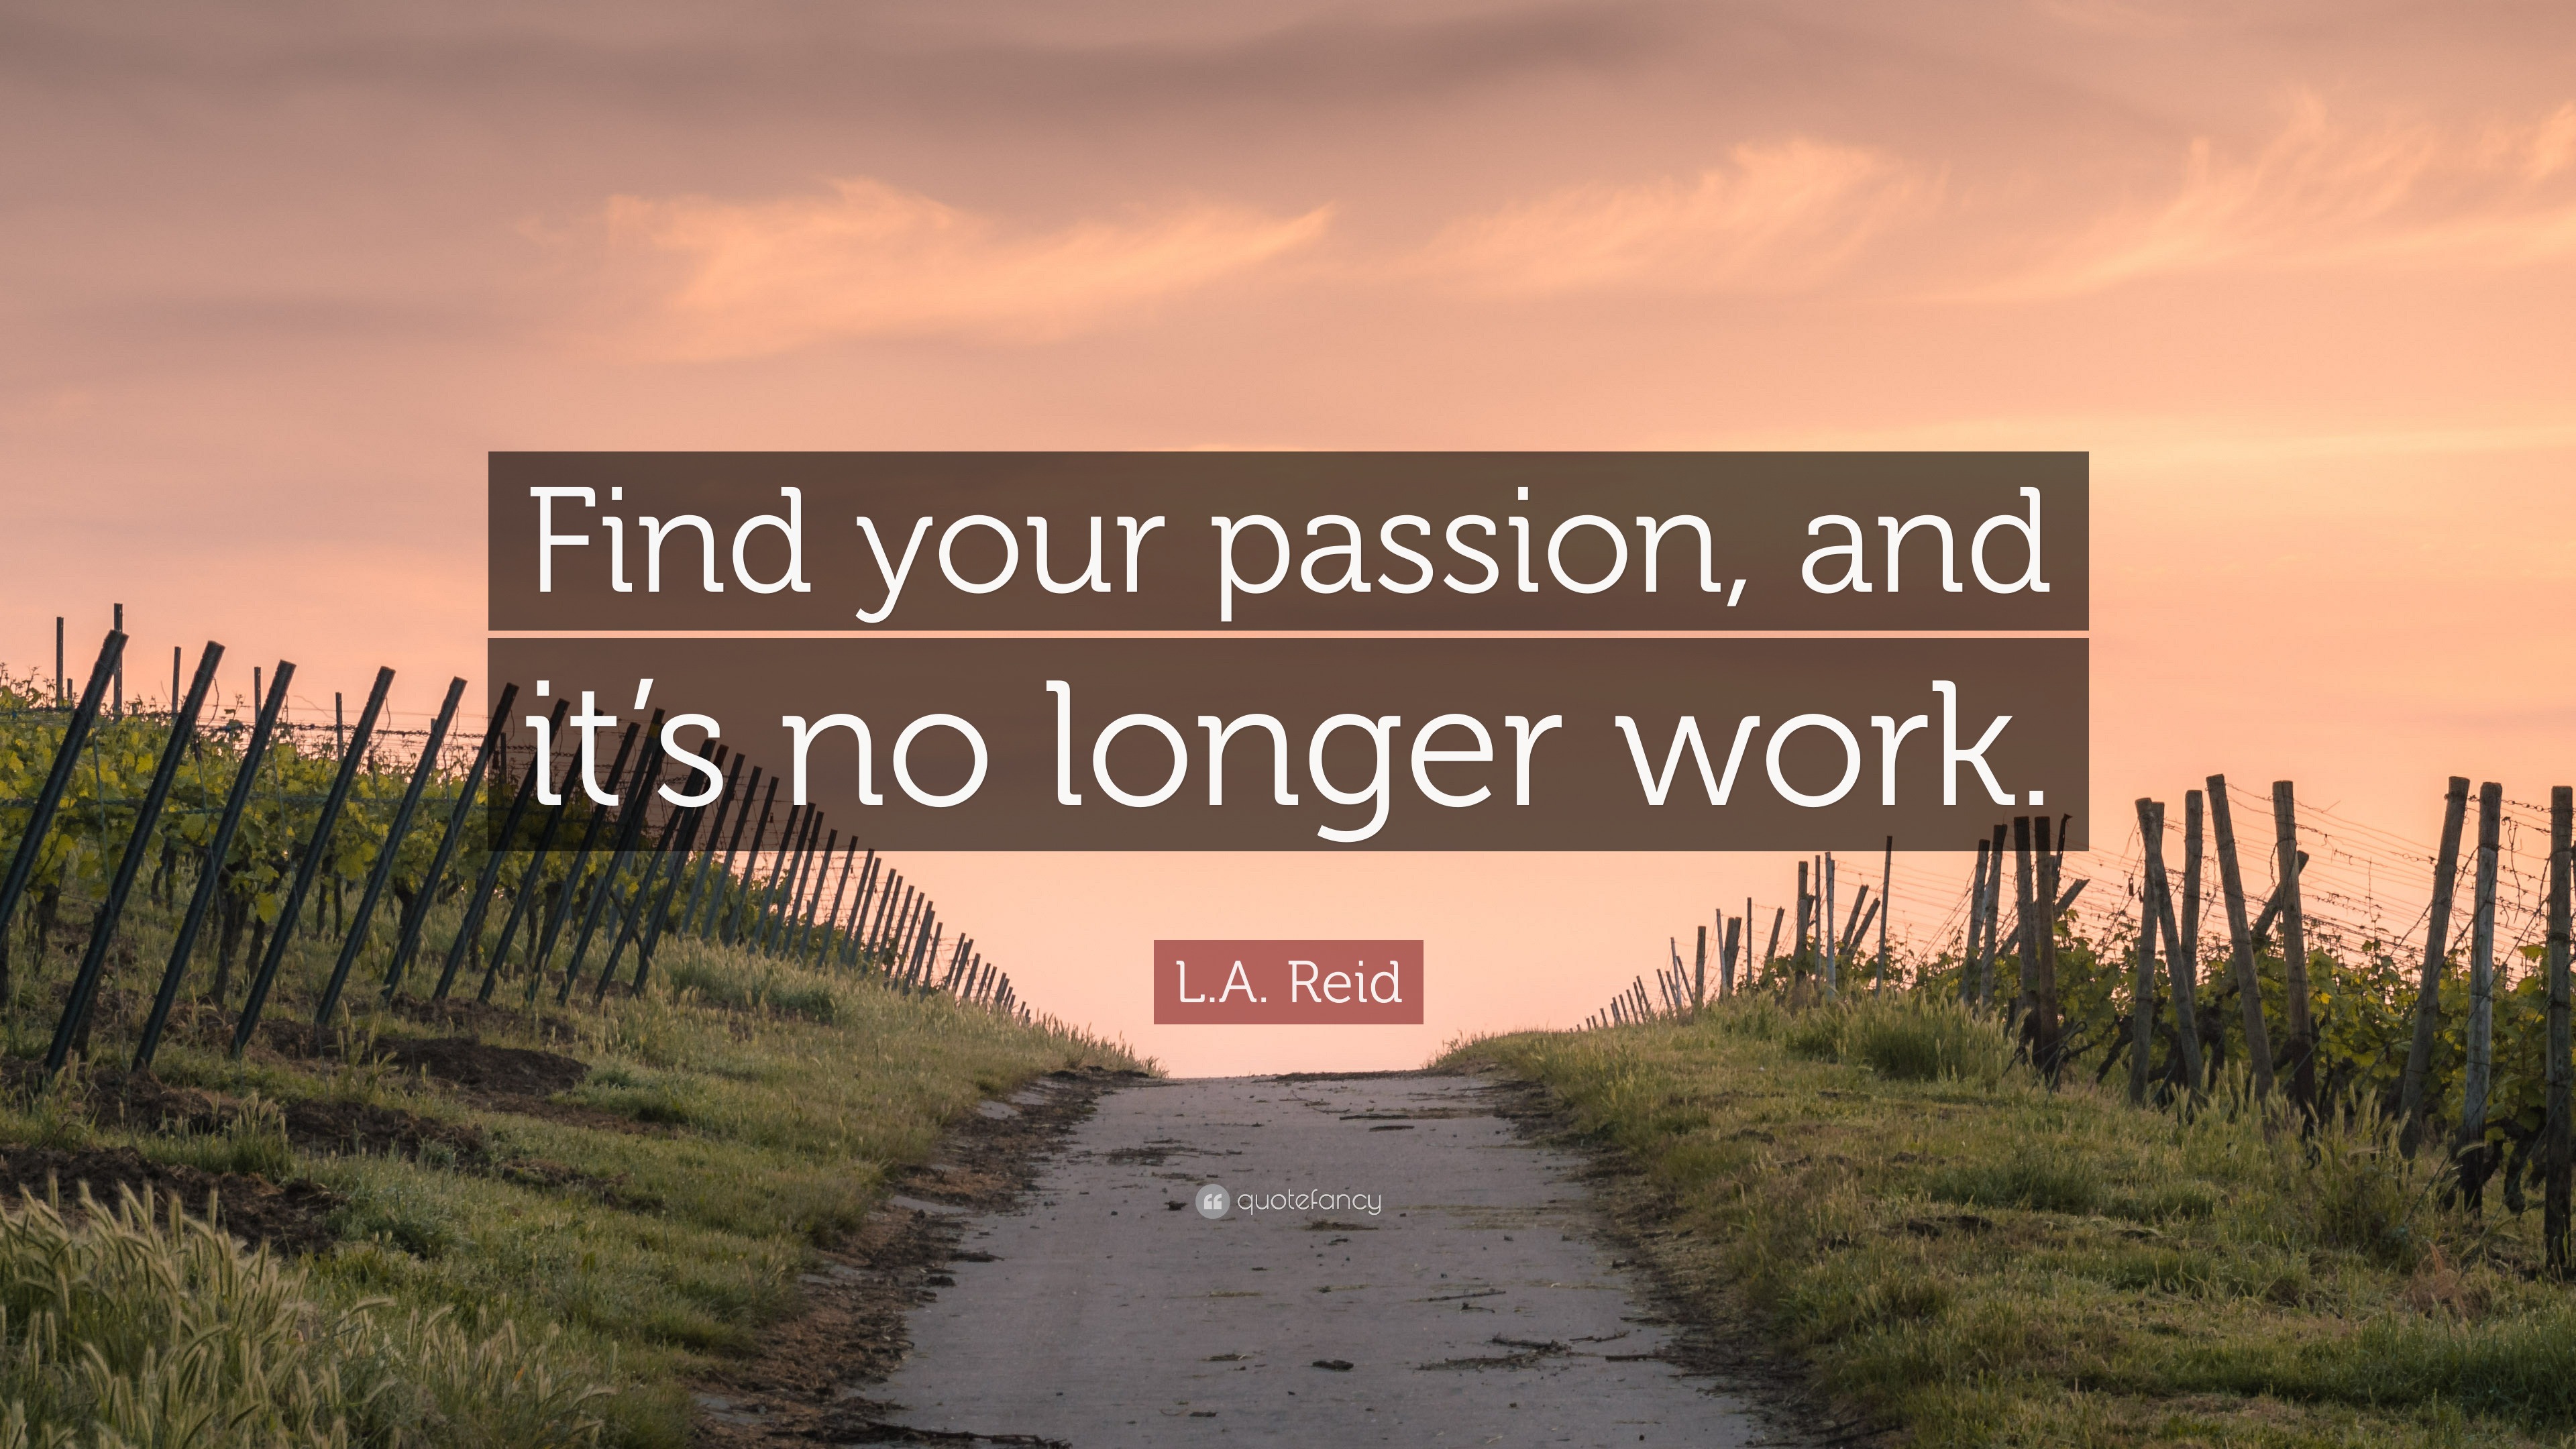 La Reid Quote “find Your Passion And Its No Longer Work”